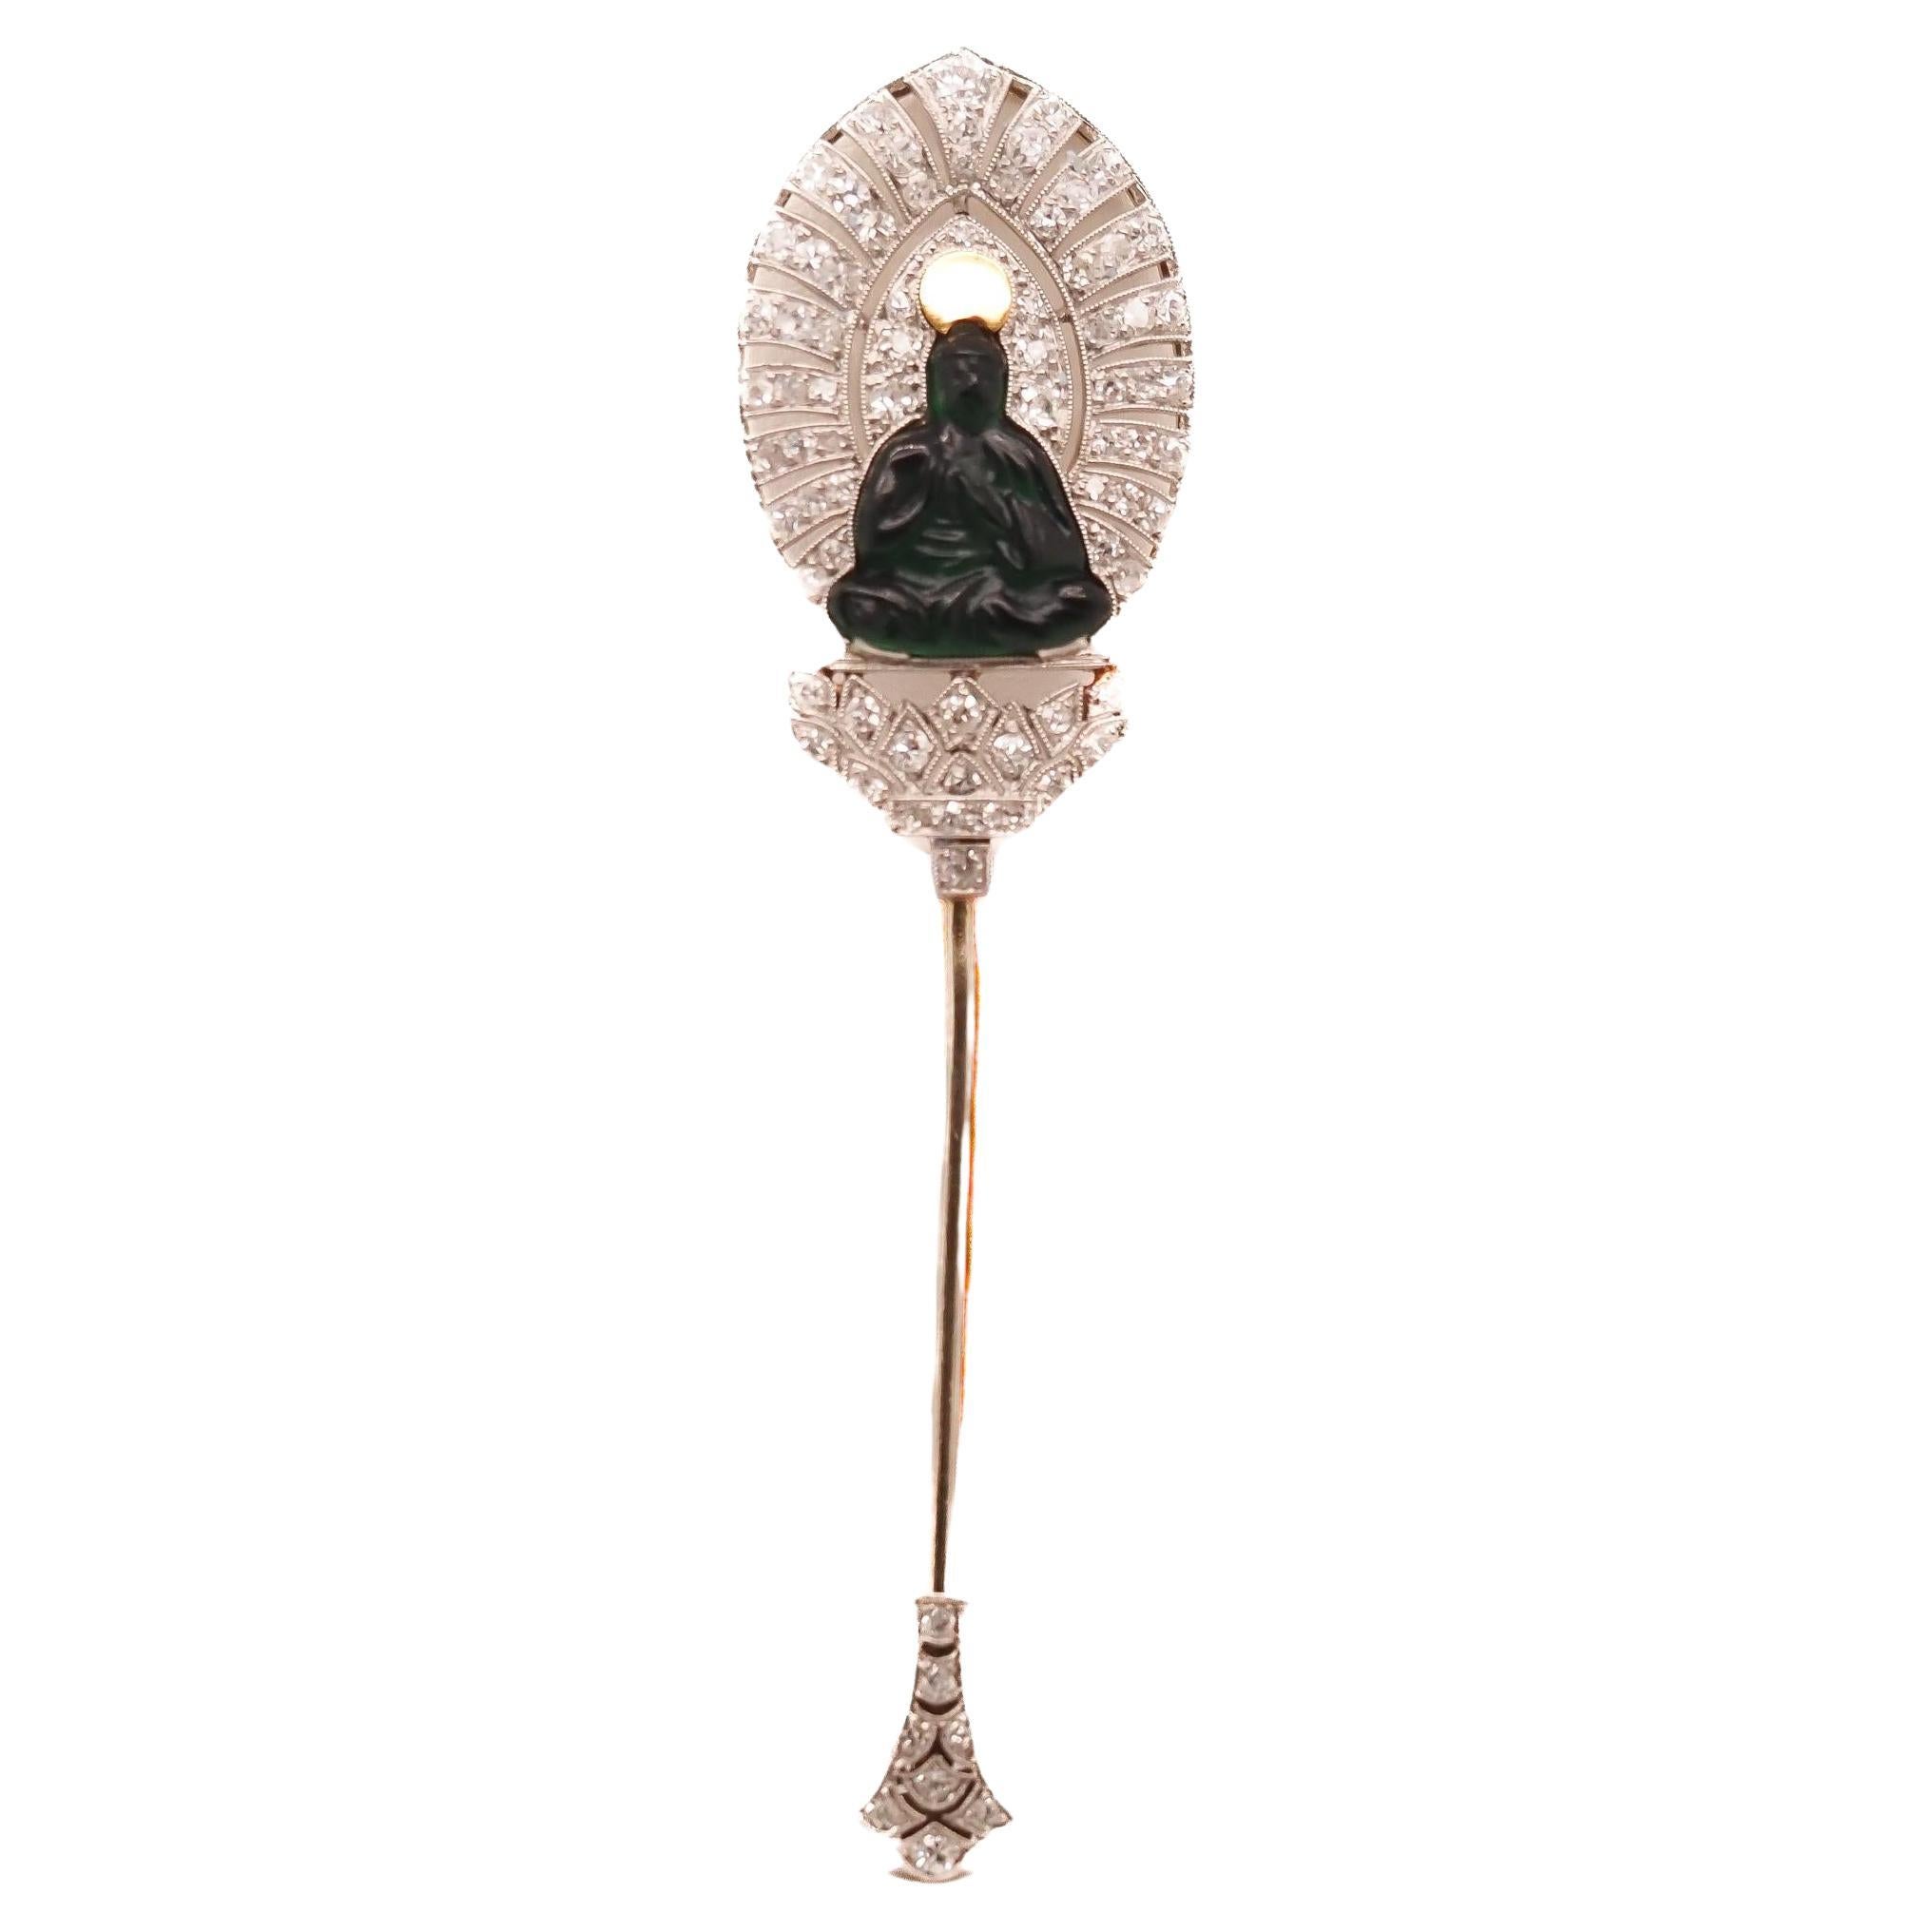 Circa 1900s Theodule Boudier French Jabot Pin with Buddha For Sale